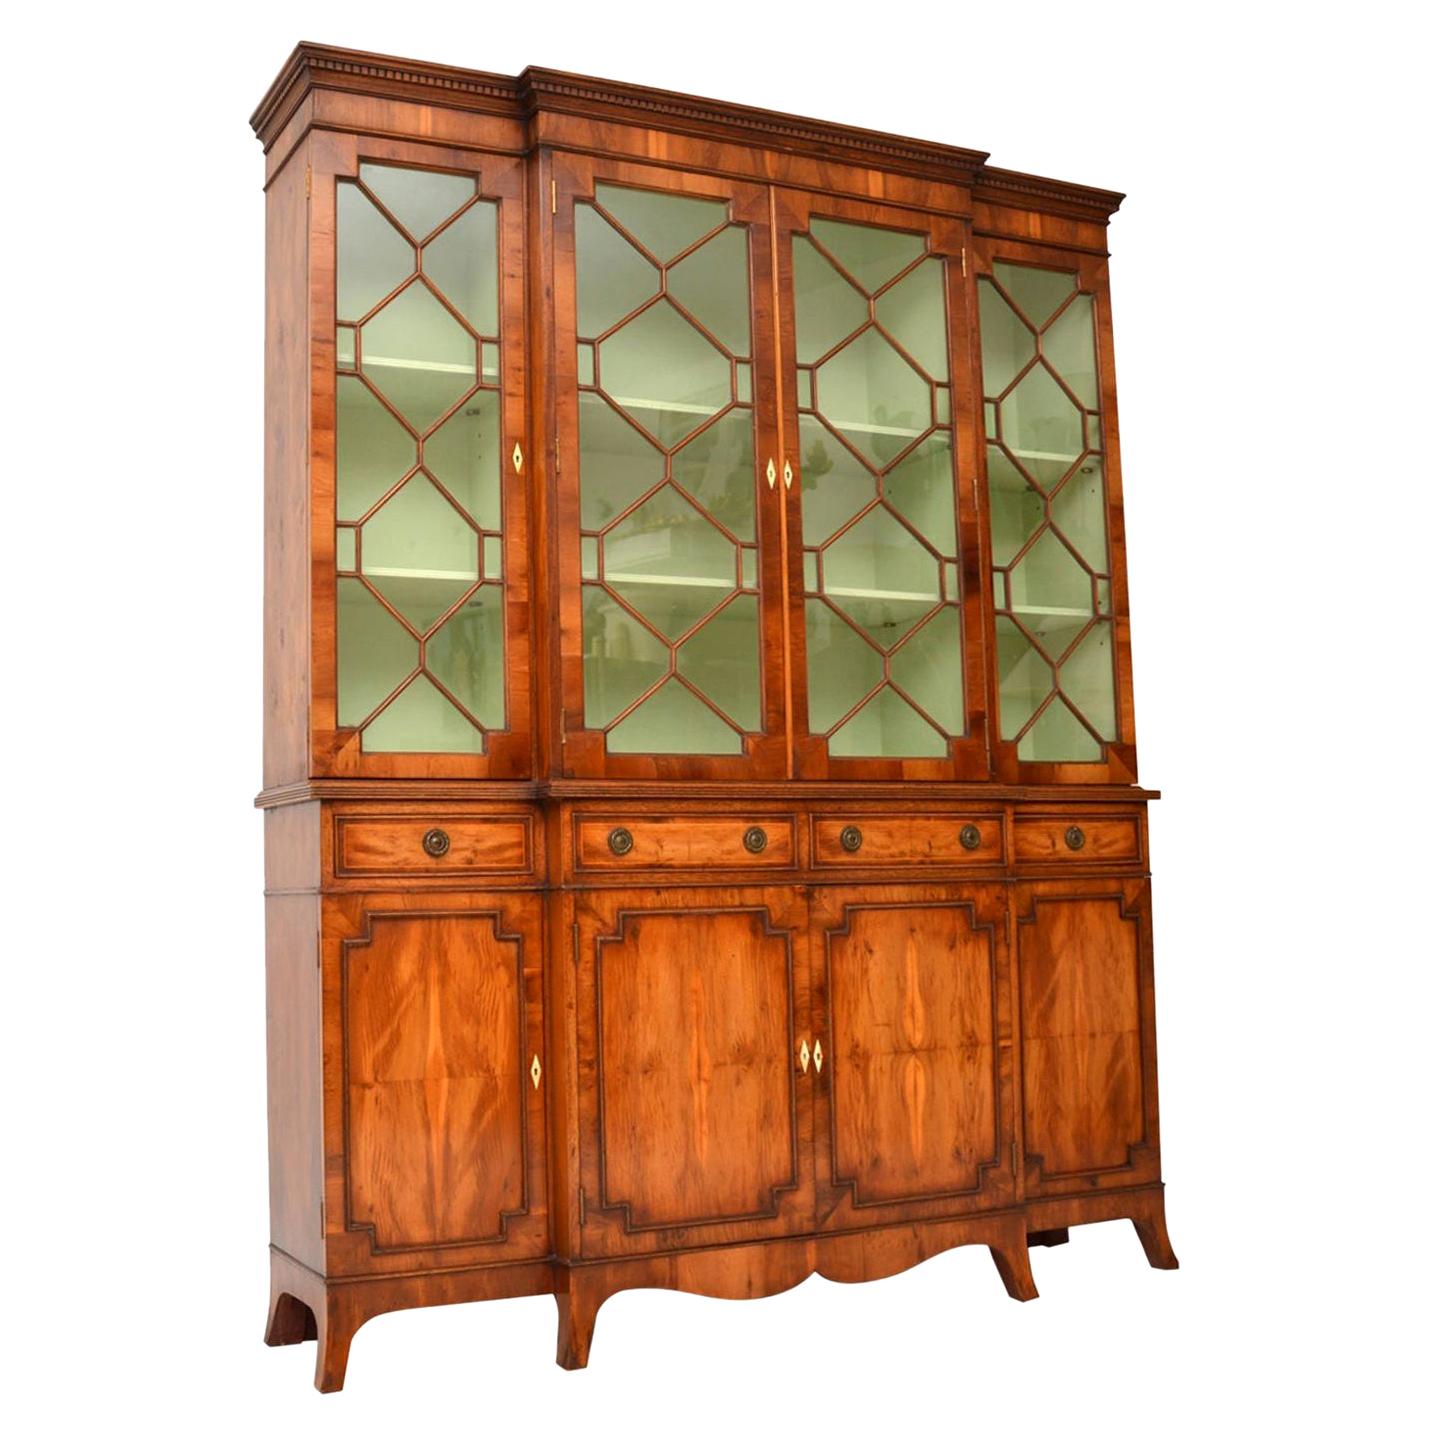 Antique Yew Wood Sheraton Style Breakfront Bookcase